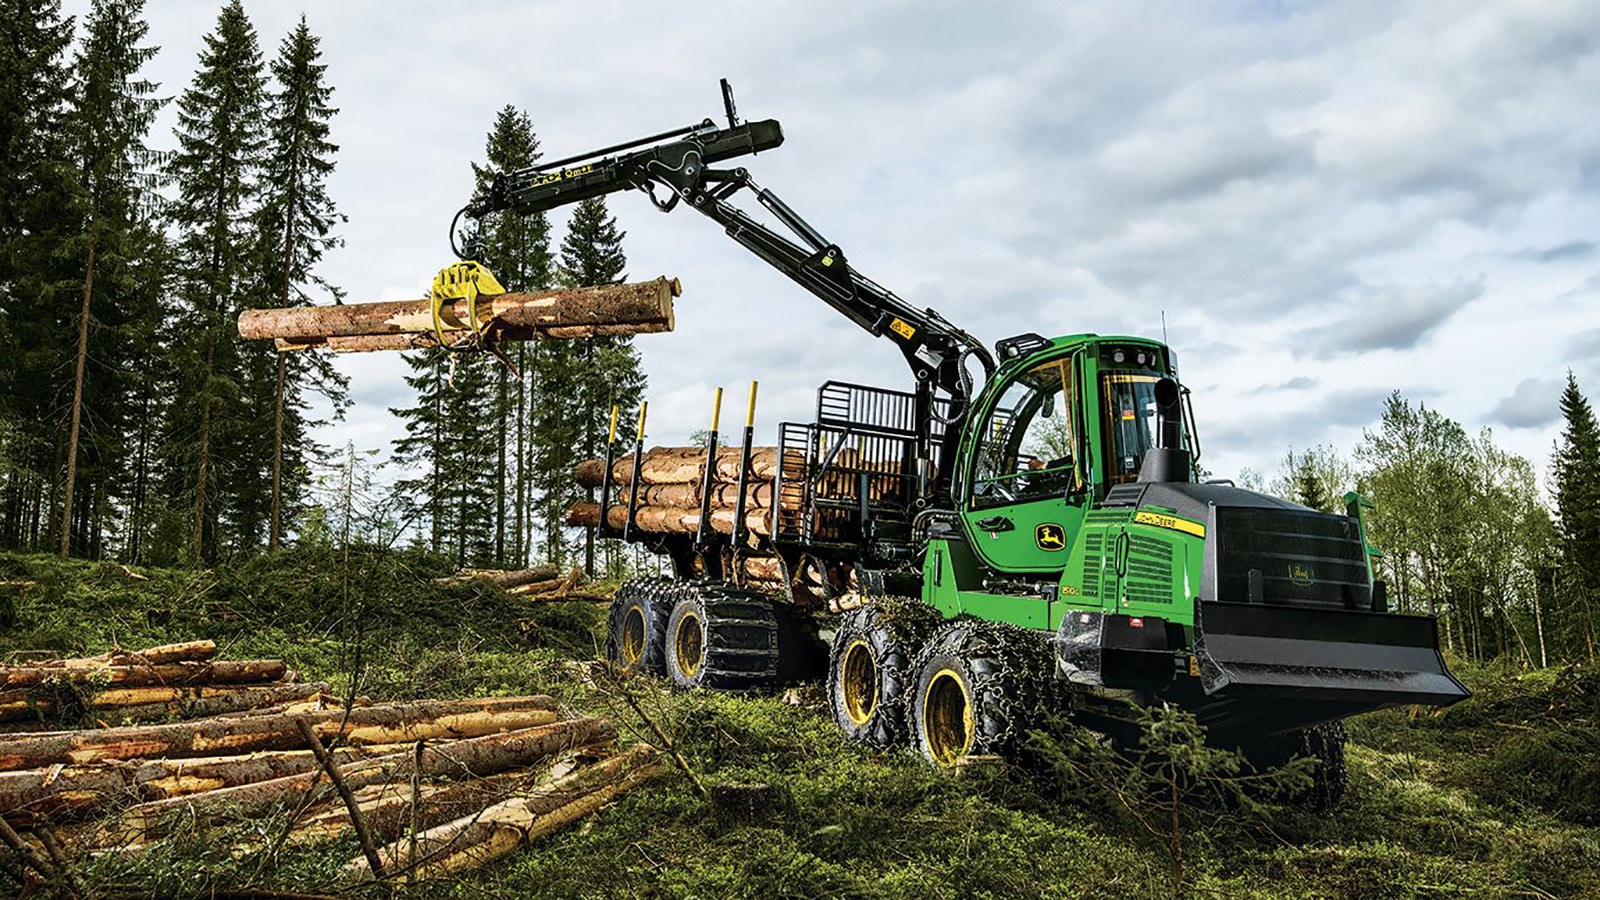 1510G Forwarder loads a log from a stack to the log bunk